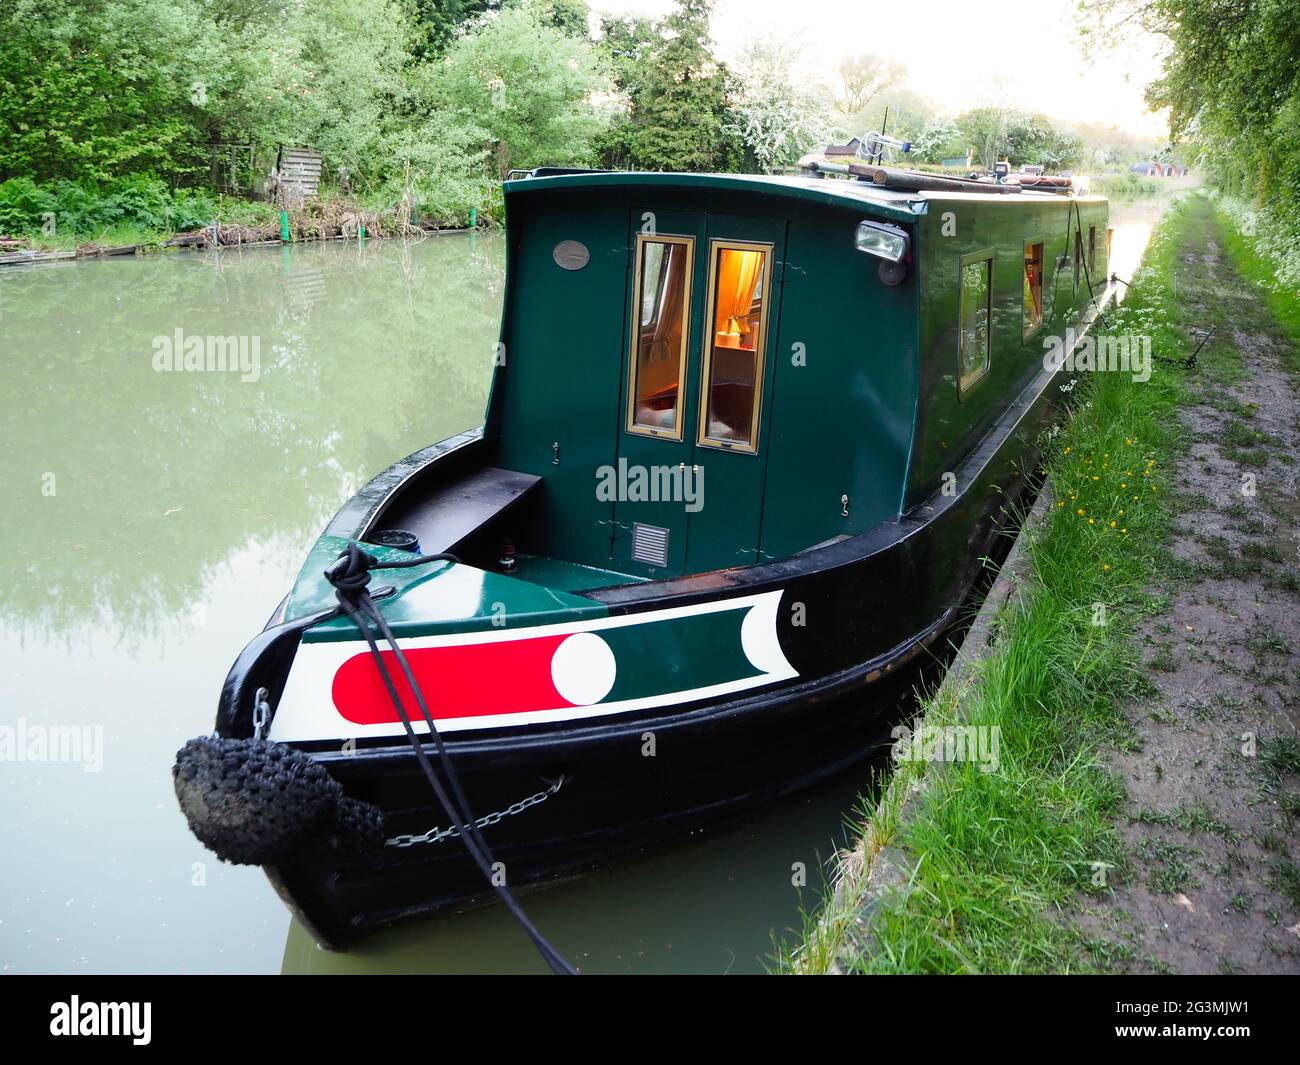 a dark green narrowboat seen moored in the evening Stock Photo